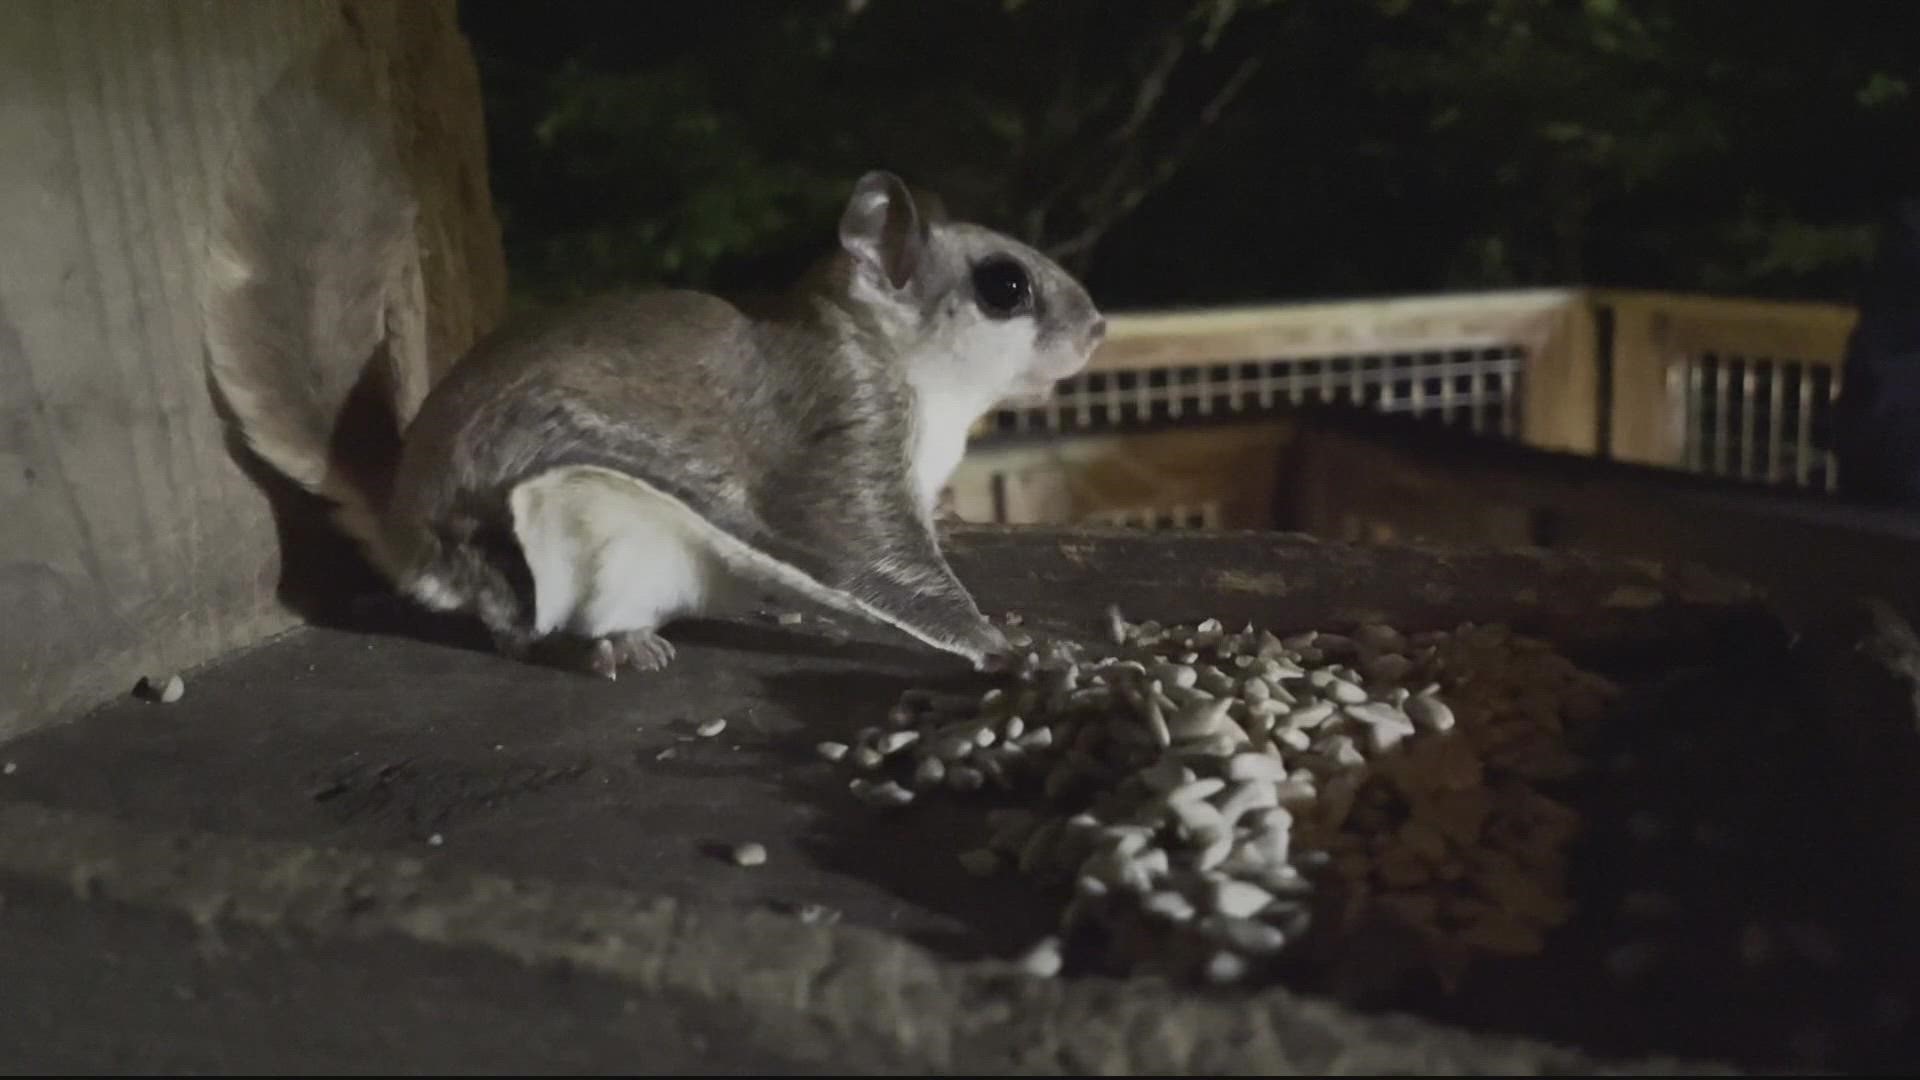 Adam Longo takes us to Wheaton, Maryland -- where a group of volunteers has an important job: taking care of flying squirrels.